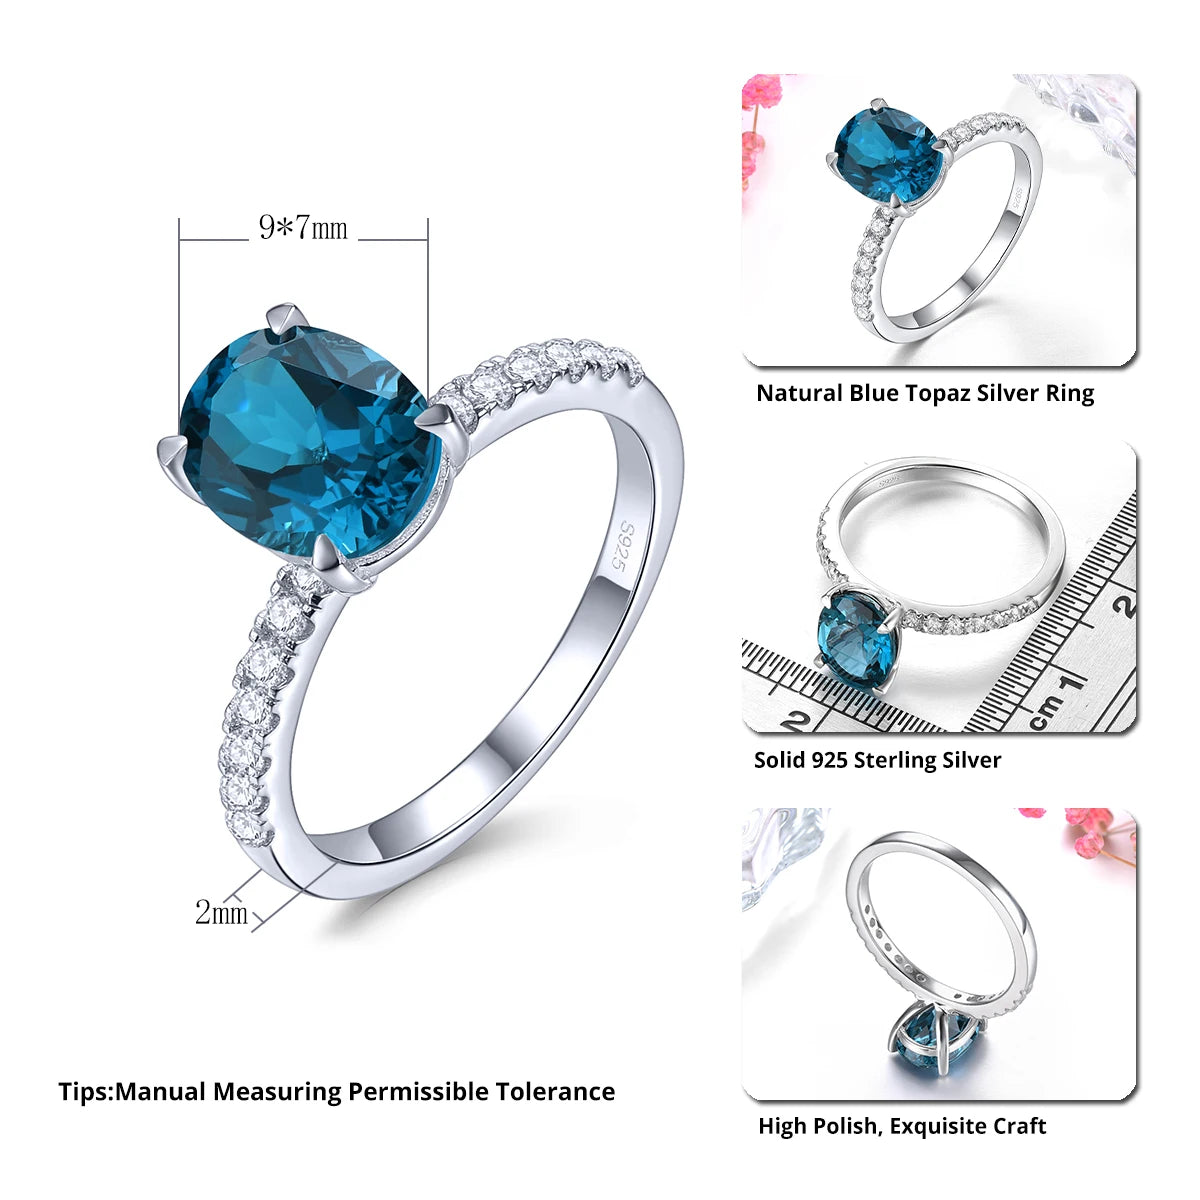 Natural Deep Blue Topaz Sterling Silver Rings 2.25 Carats Genuine Gemstone Oval Faced Cutting Classic Design Daily Fine Jewelrys